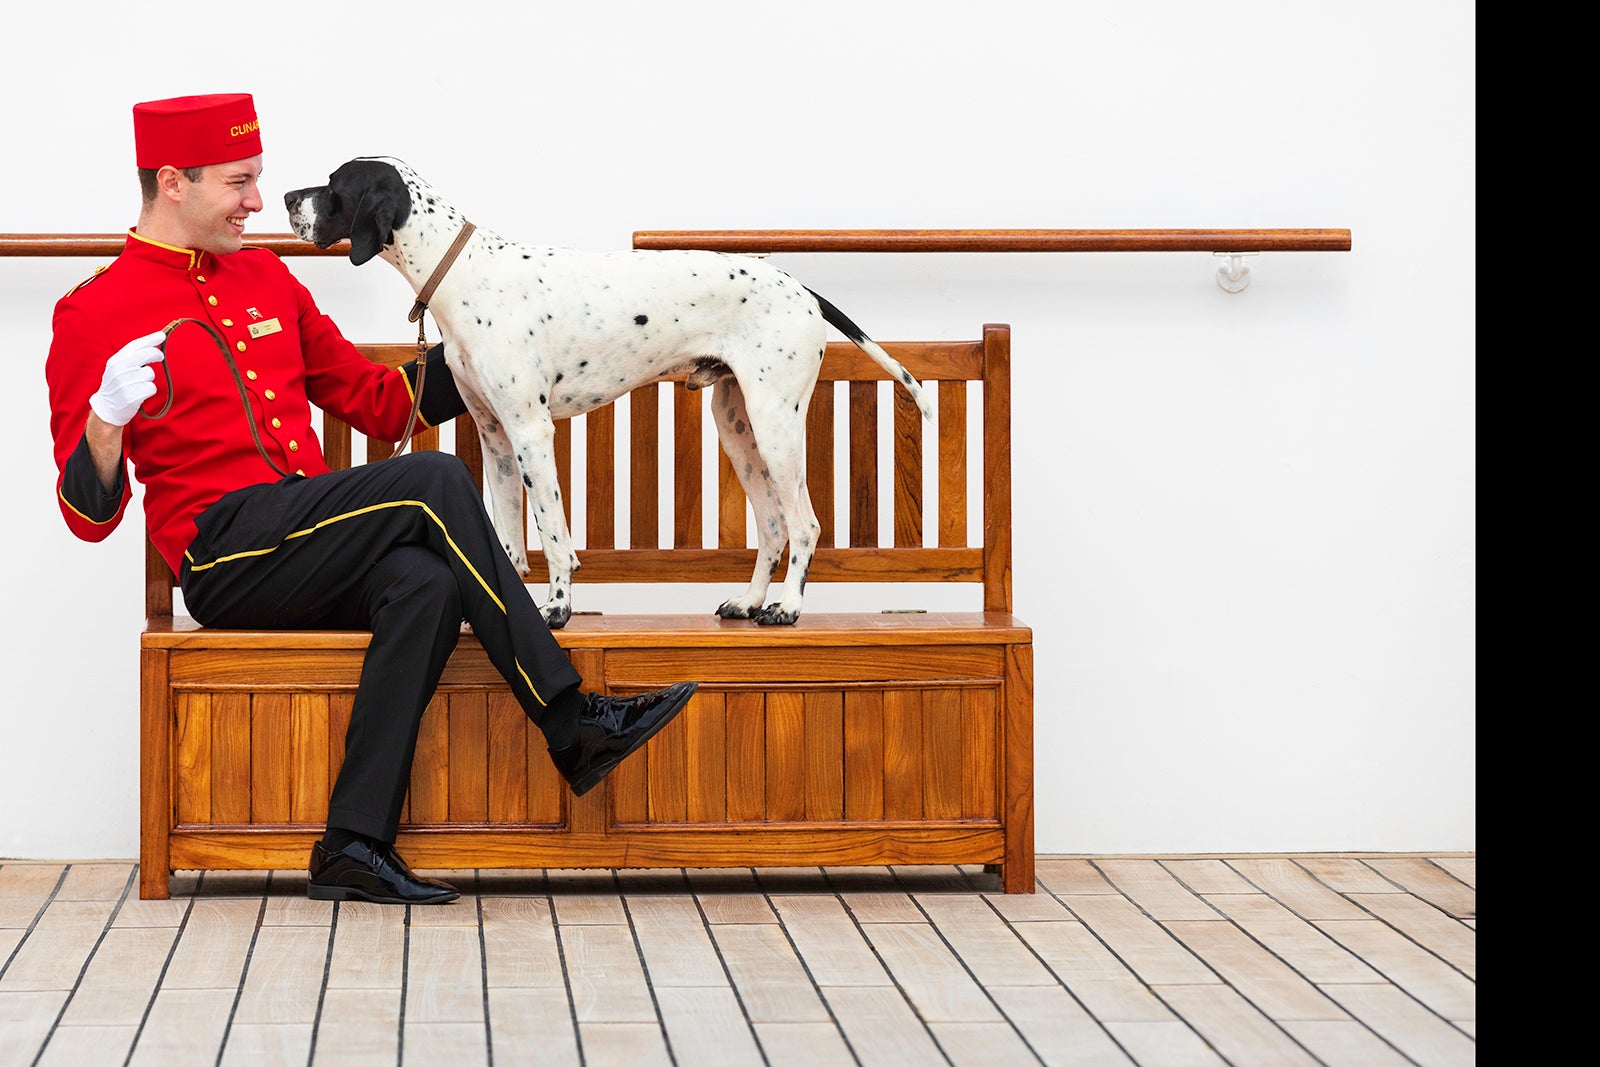 cruise with service dog